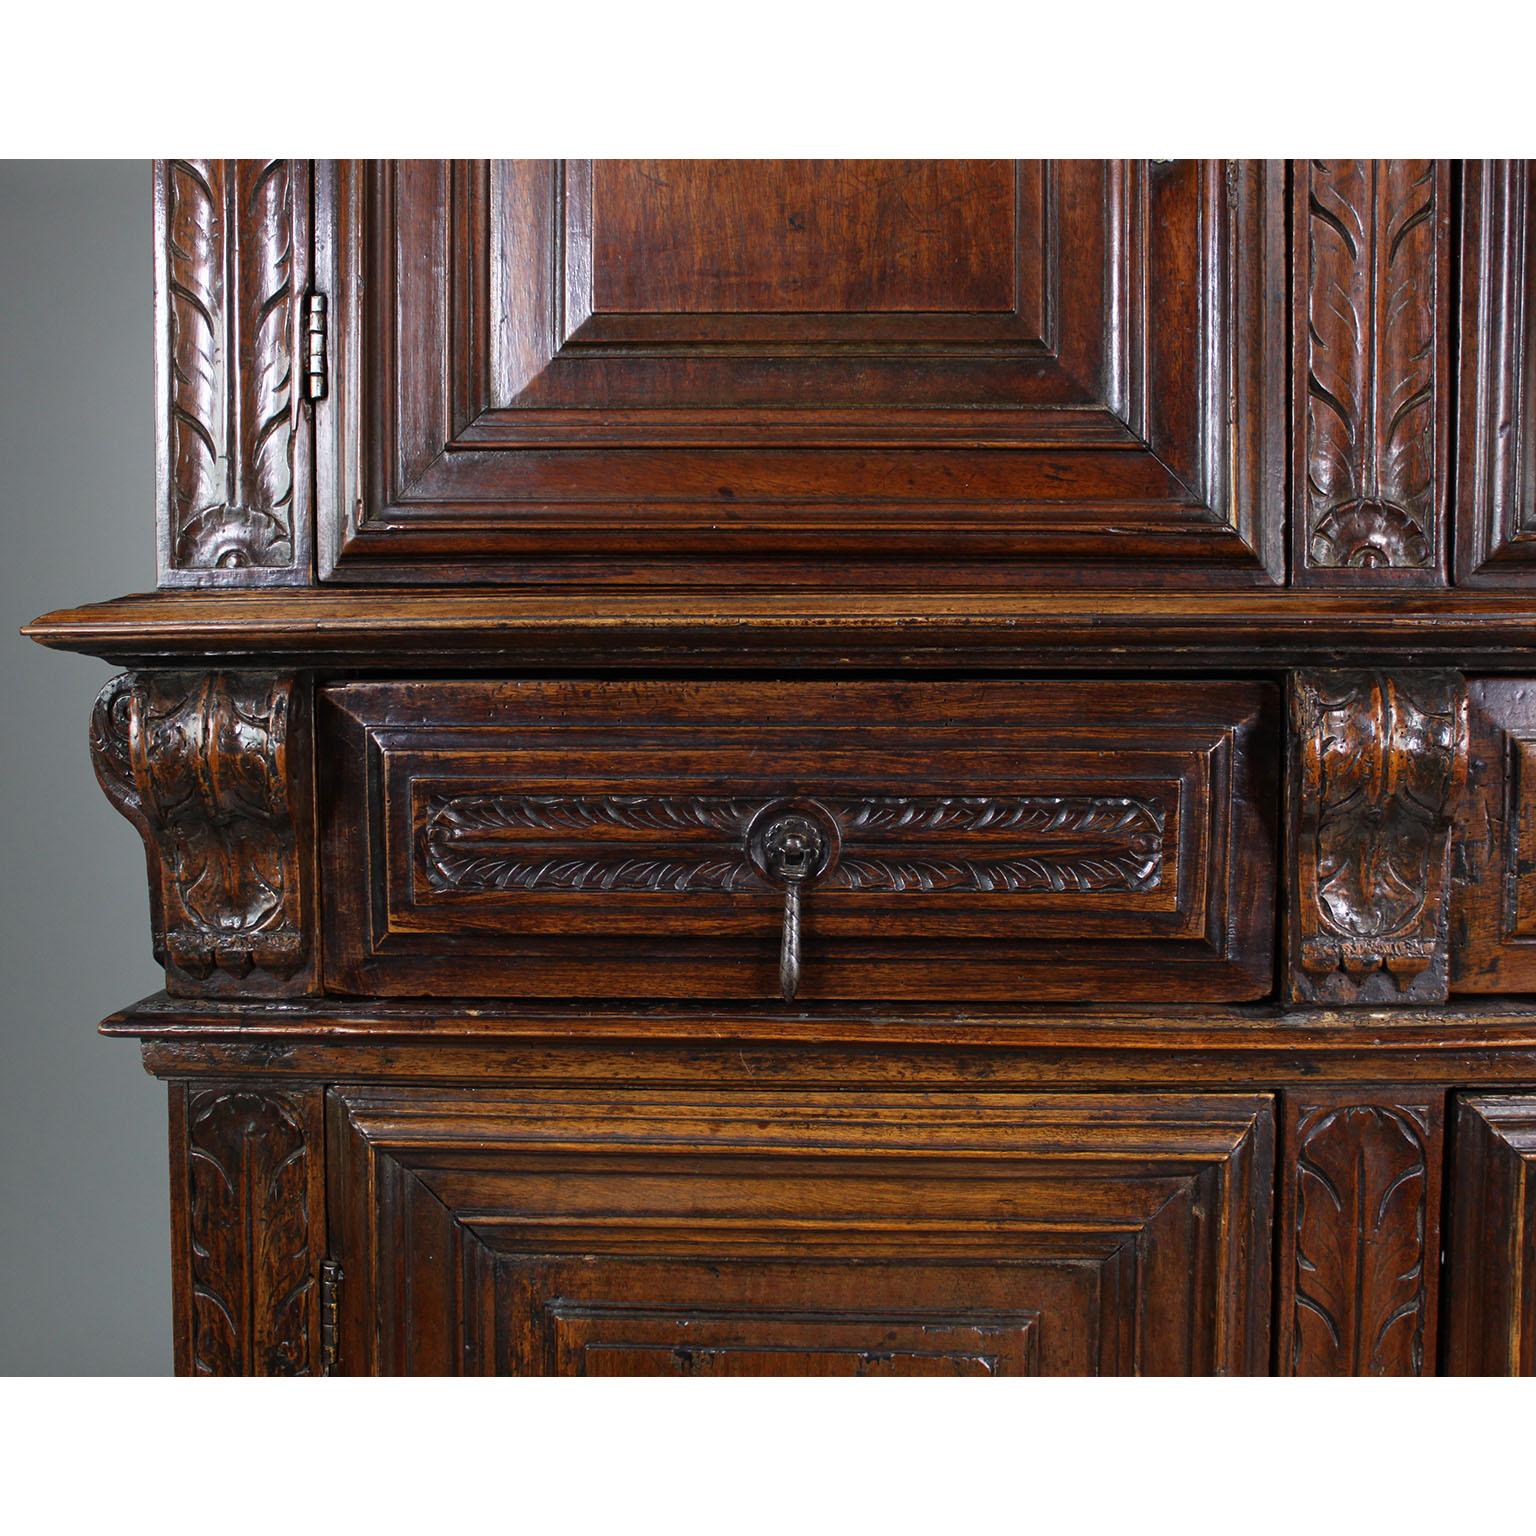 A 17th-18th Century French/Italian Renaissance Walnut Carved Credenza Cabinet For Sale 3